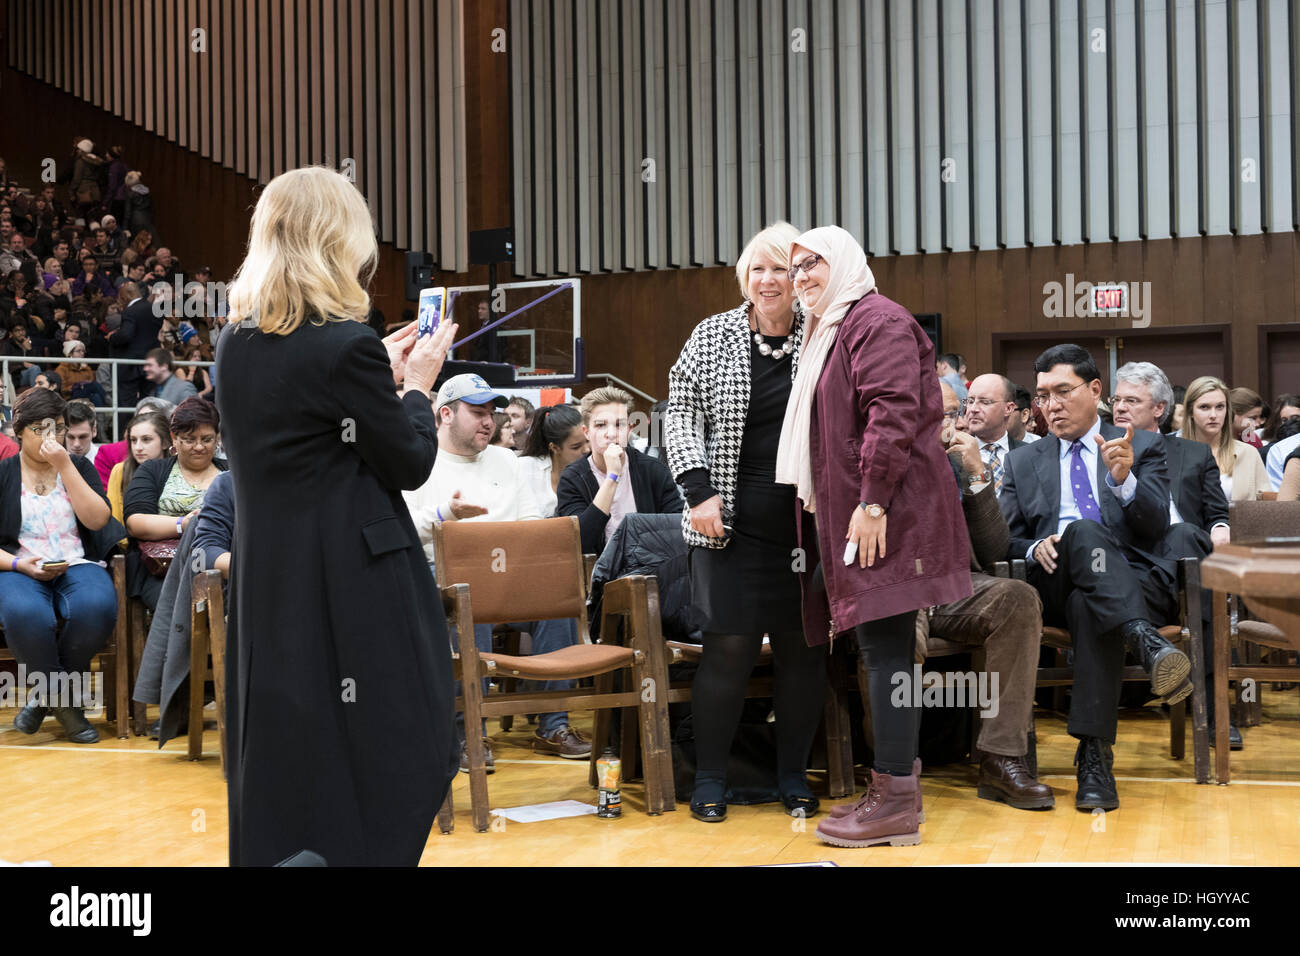 London, Ontario, Canada, 13th January, 2017. Kate Young, Member of Parliament (MP) London West, takes a picture of members of the audience before the start of a town hall Q&A with the Prime Minister of Canada, held in London, Ontario. London was one of the Prime Minister's stops as part of his cross-country tour. Credit: Rubens Alarcon/Alamy Live News Stock Photo